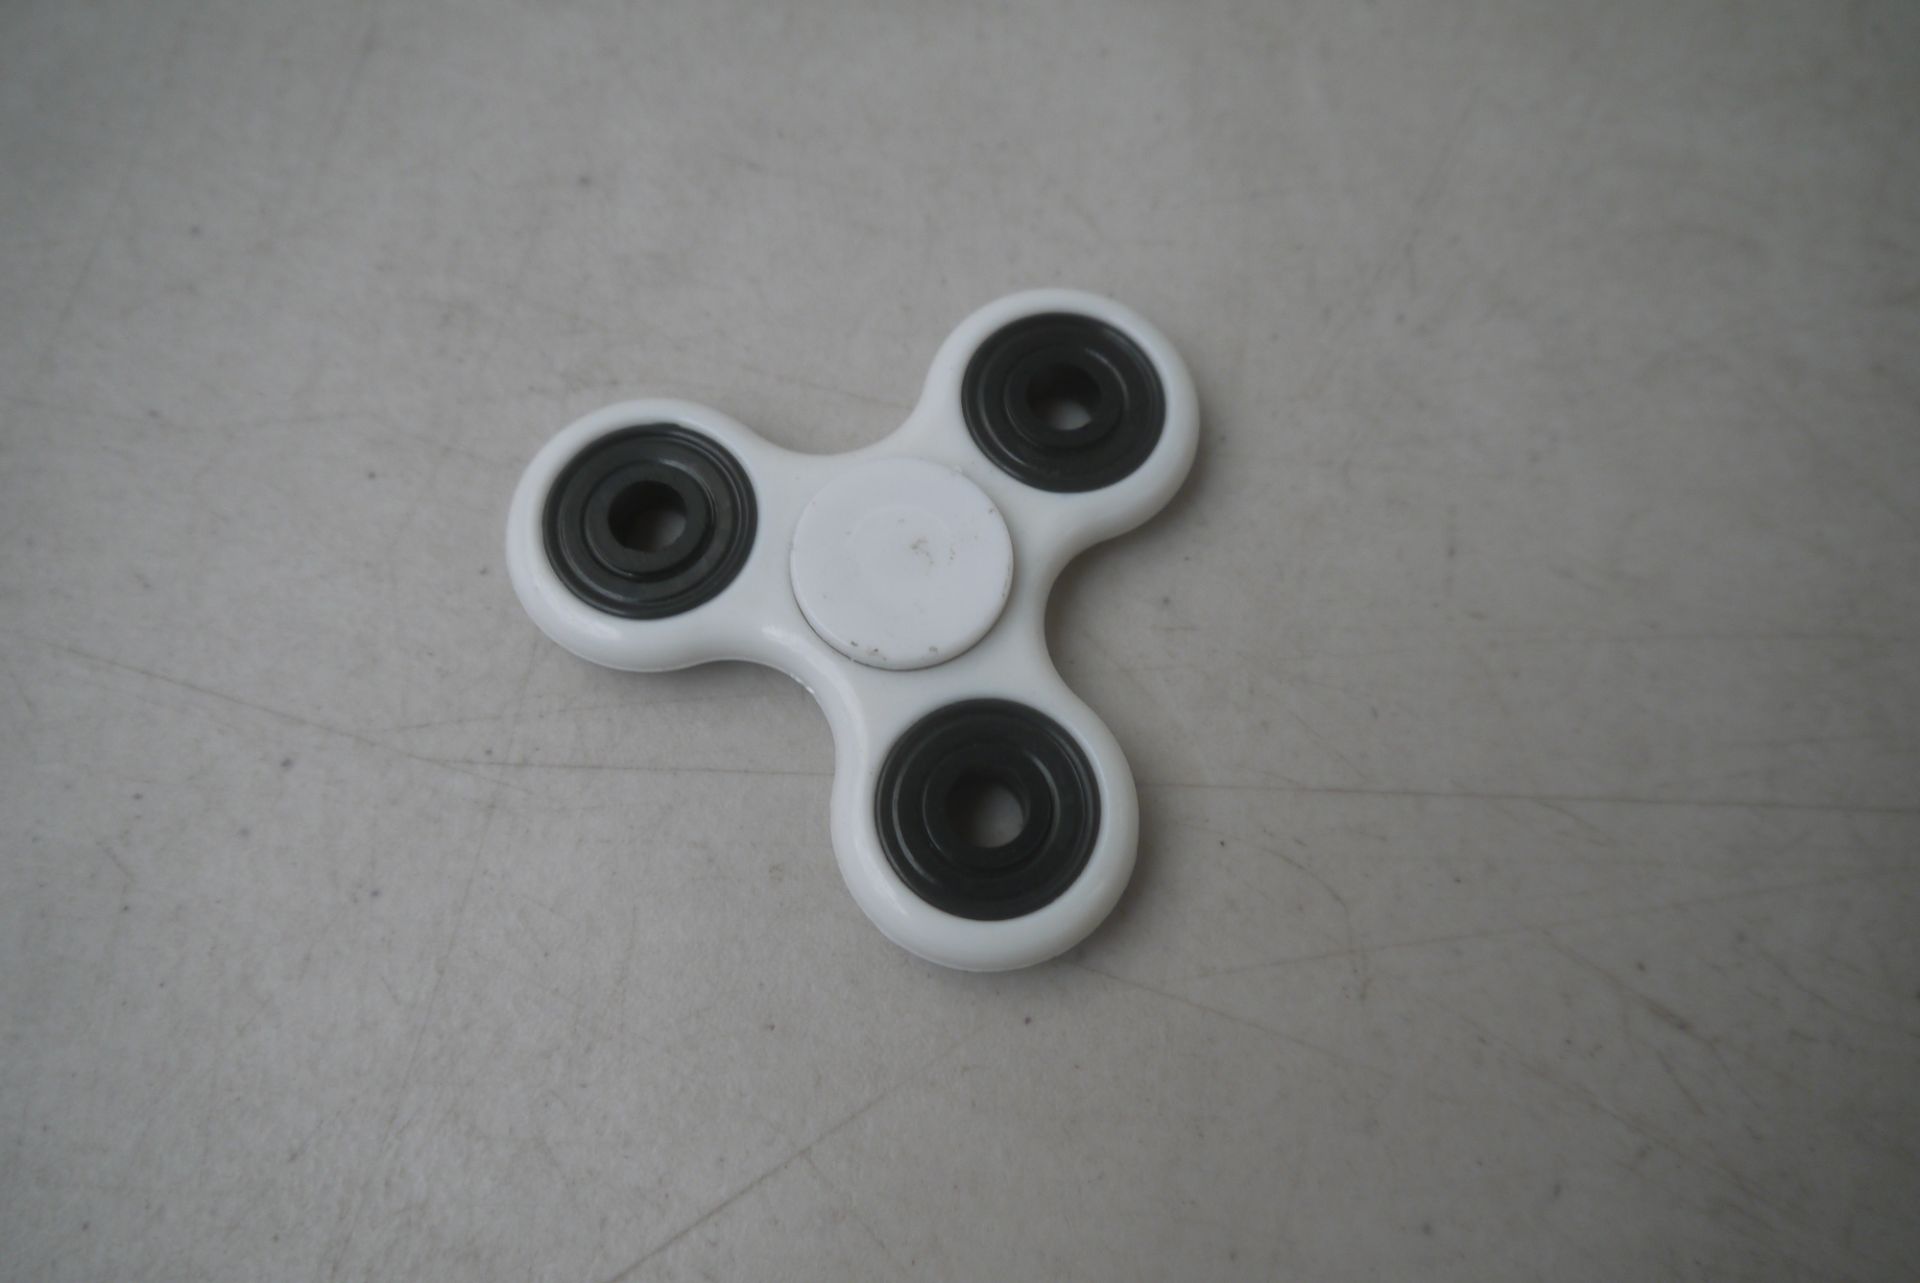 Fidget spinner, see picture for colour, new and boxed.